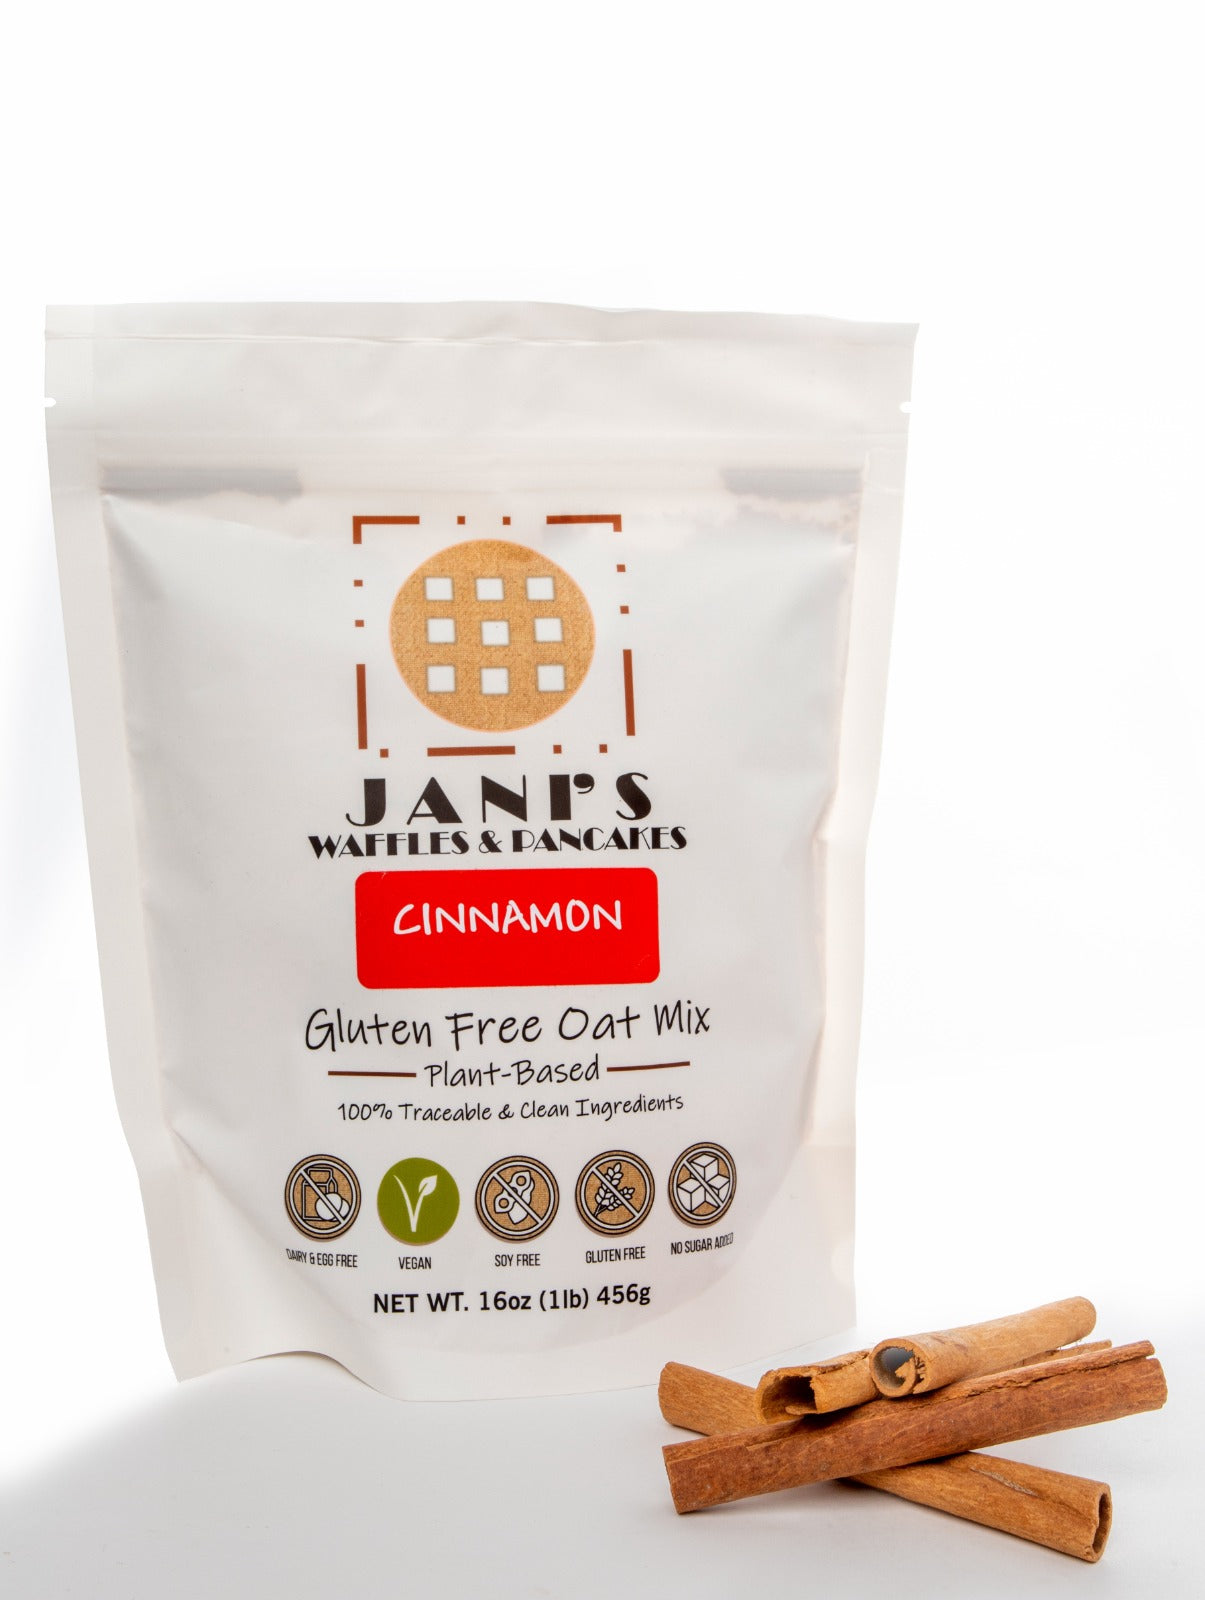 CINNAMON Dry Mix for Waffles & Pancakes, Pouch of 14 to16 Servings